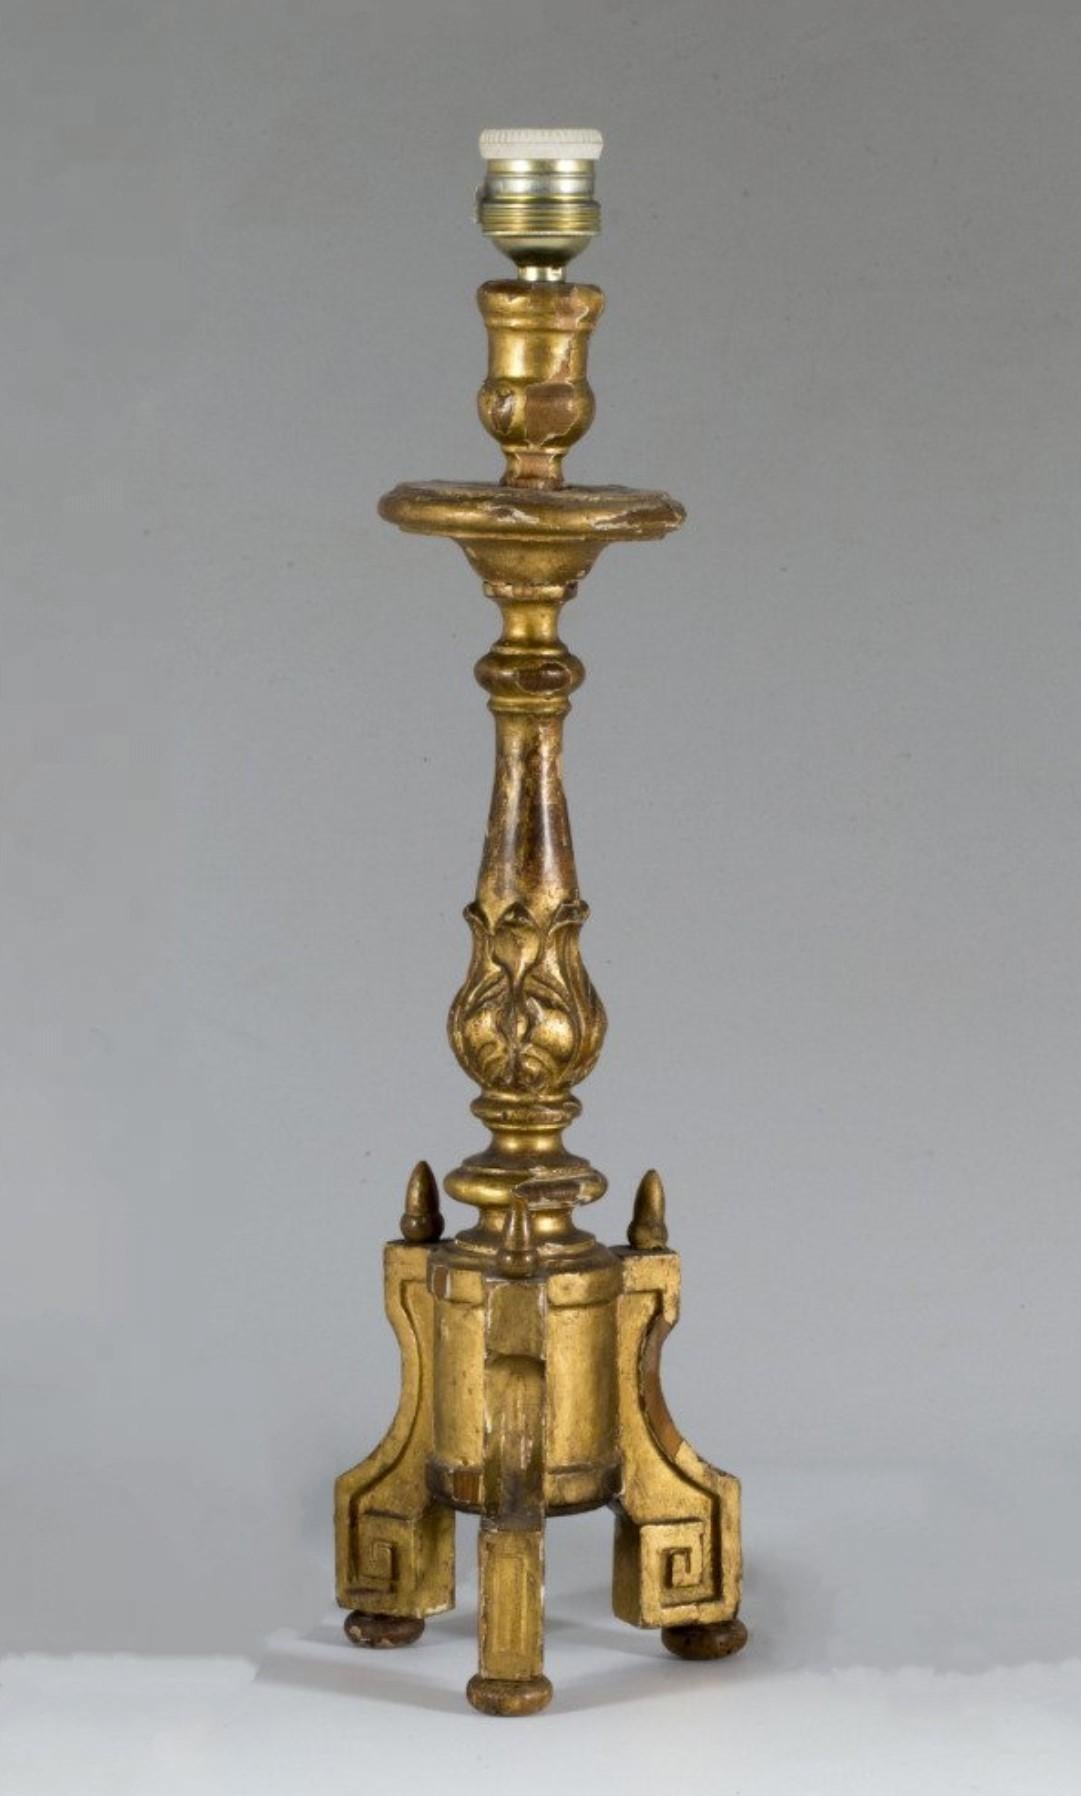 A wonderful pair of wooden altar candlesticks converted to table lamps, Spain, mid-18th century. Hand-carved decorate with acanthus leaf motivs on richly elaborate tripod base and gold leaf gilding over gesso, with new of-white lamp shades. These